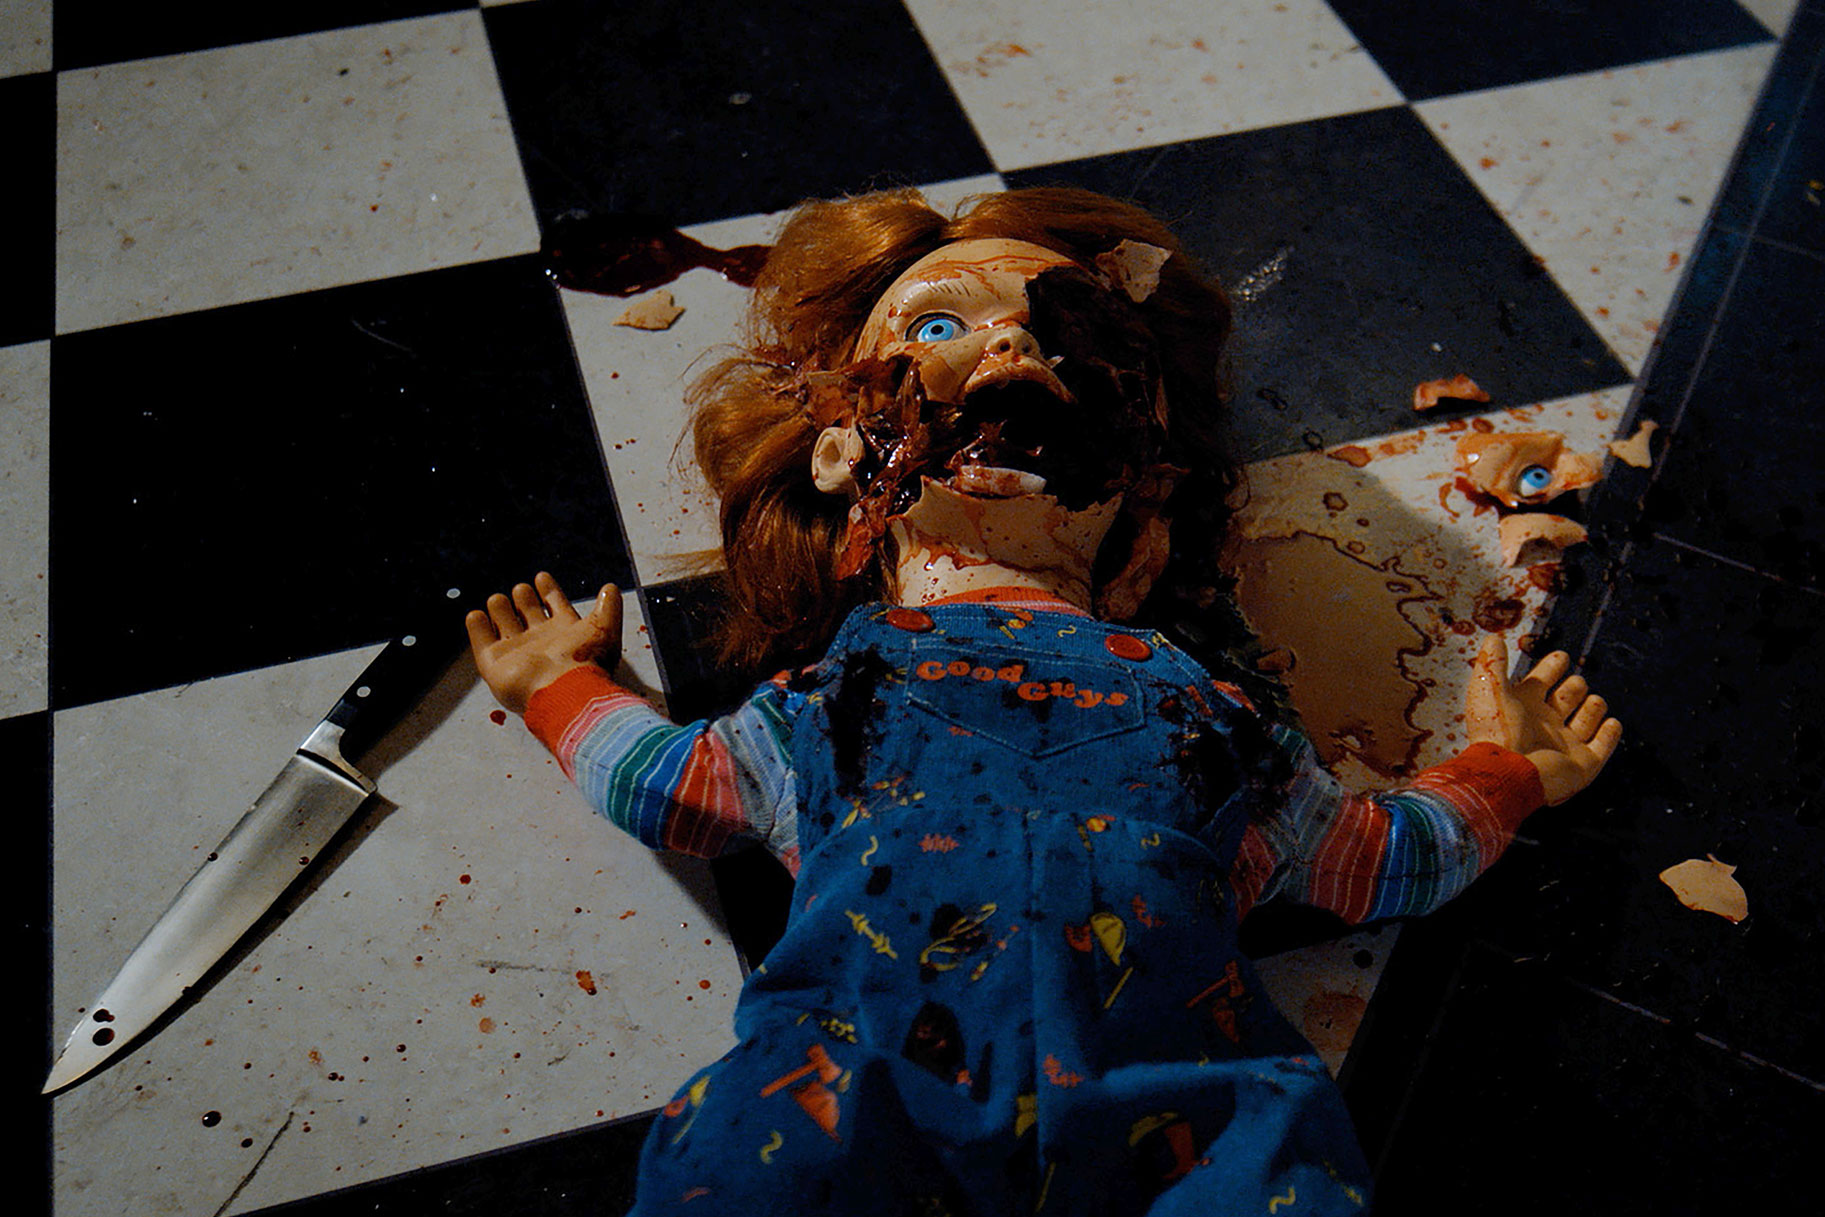 Smashed Chucky layed out on the floor